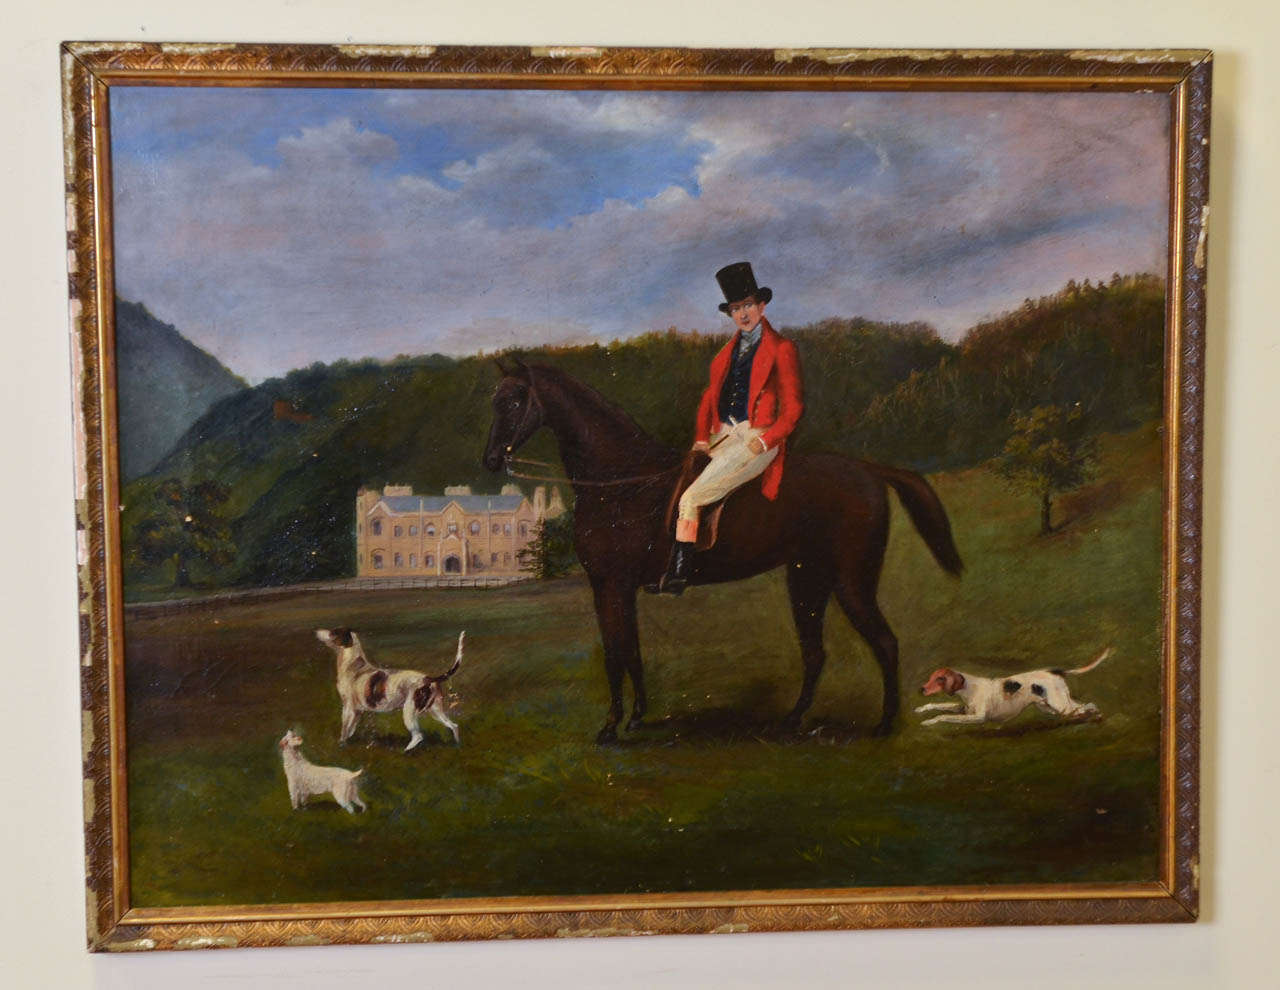 This oil painting of an English gentleman on horseback is in wonderful condition,  The colors are very good considering the age.  There is a manor home in the background and wonderful hunting dogs with the hunter.

Item # 3390G